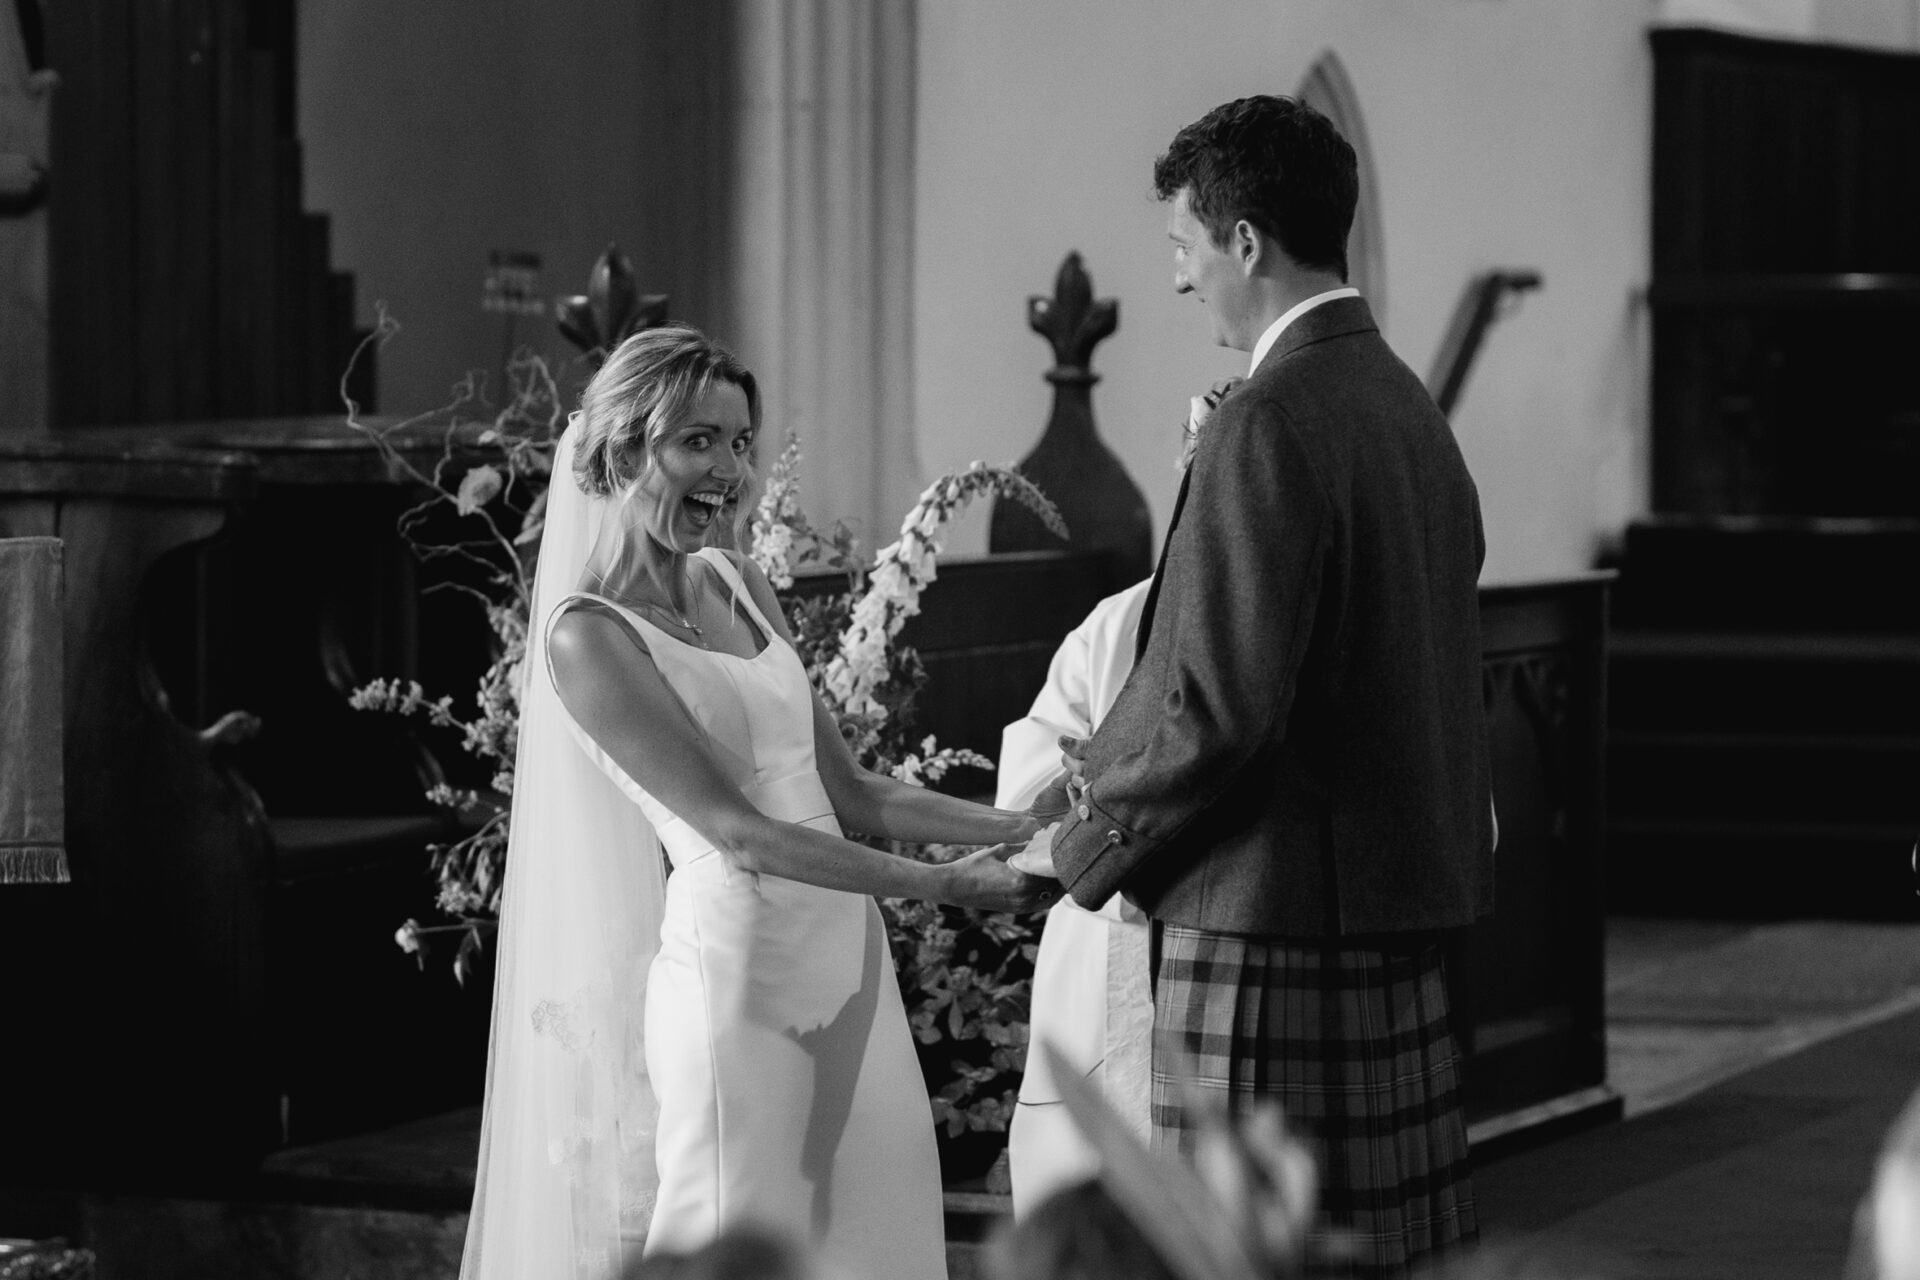 The bride and groom share a laugh with their guests during their Devon church wedding ceremony